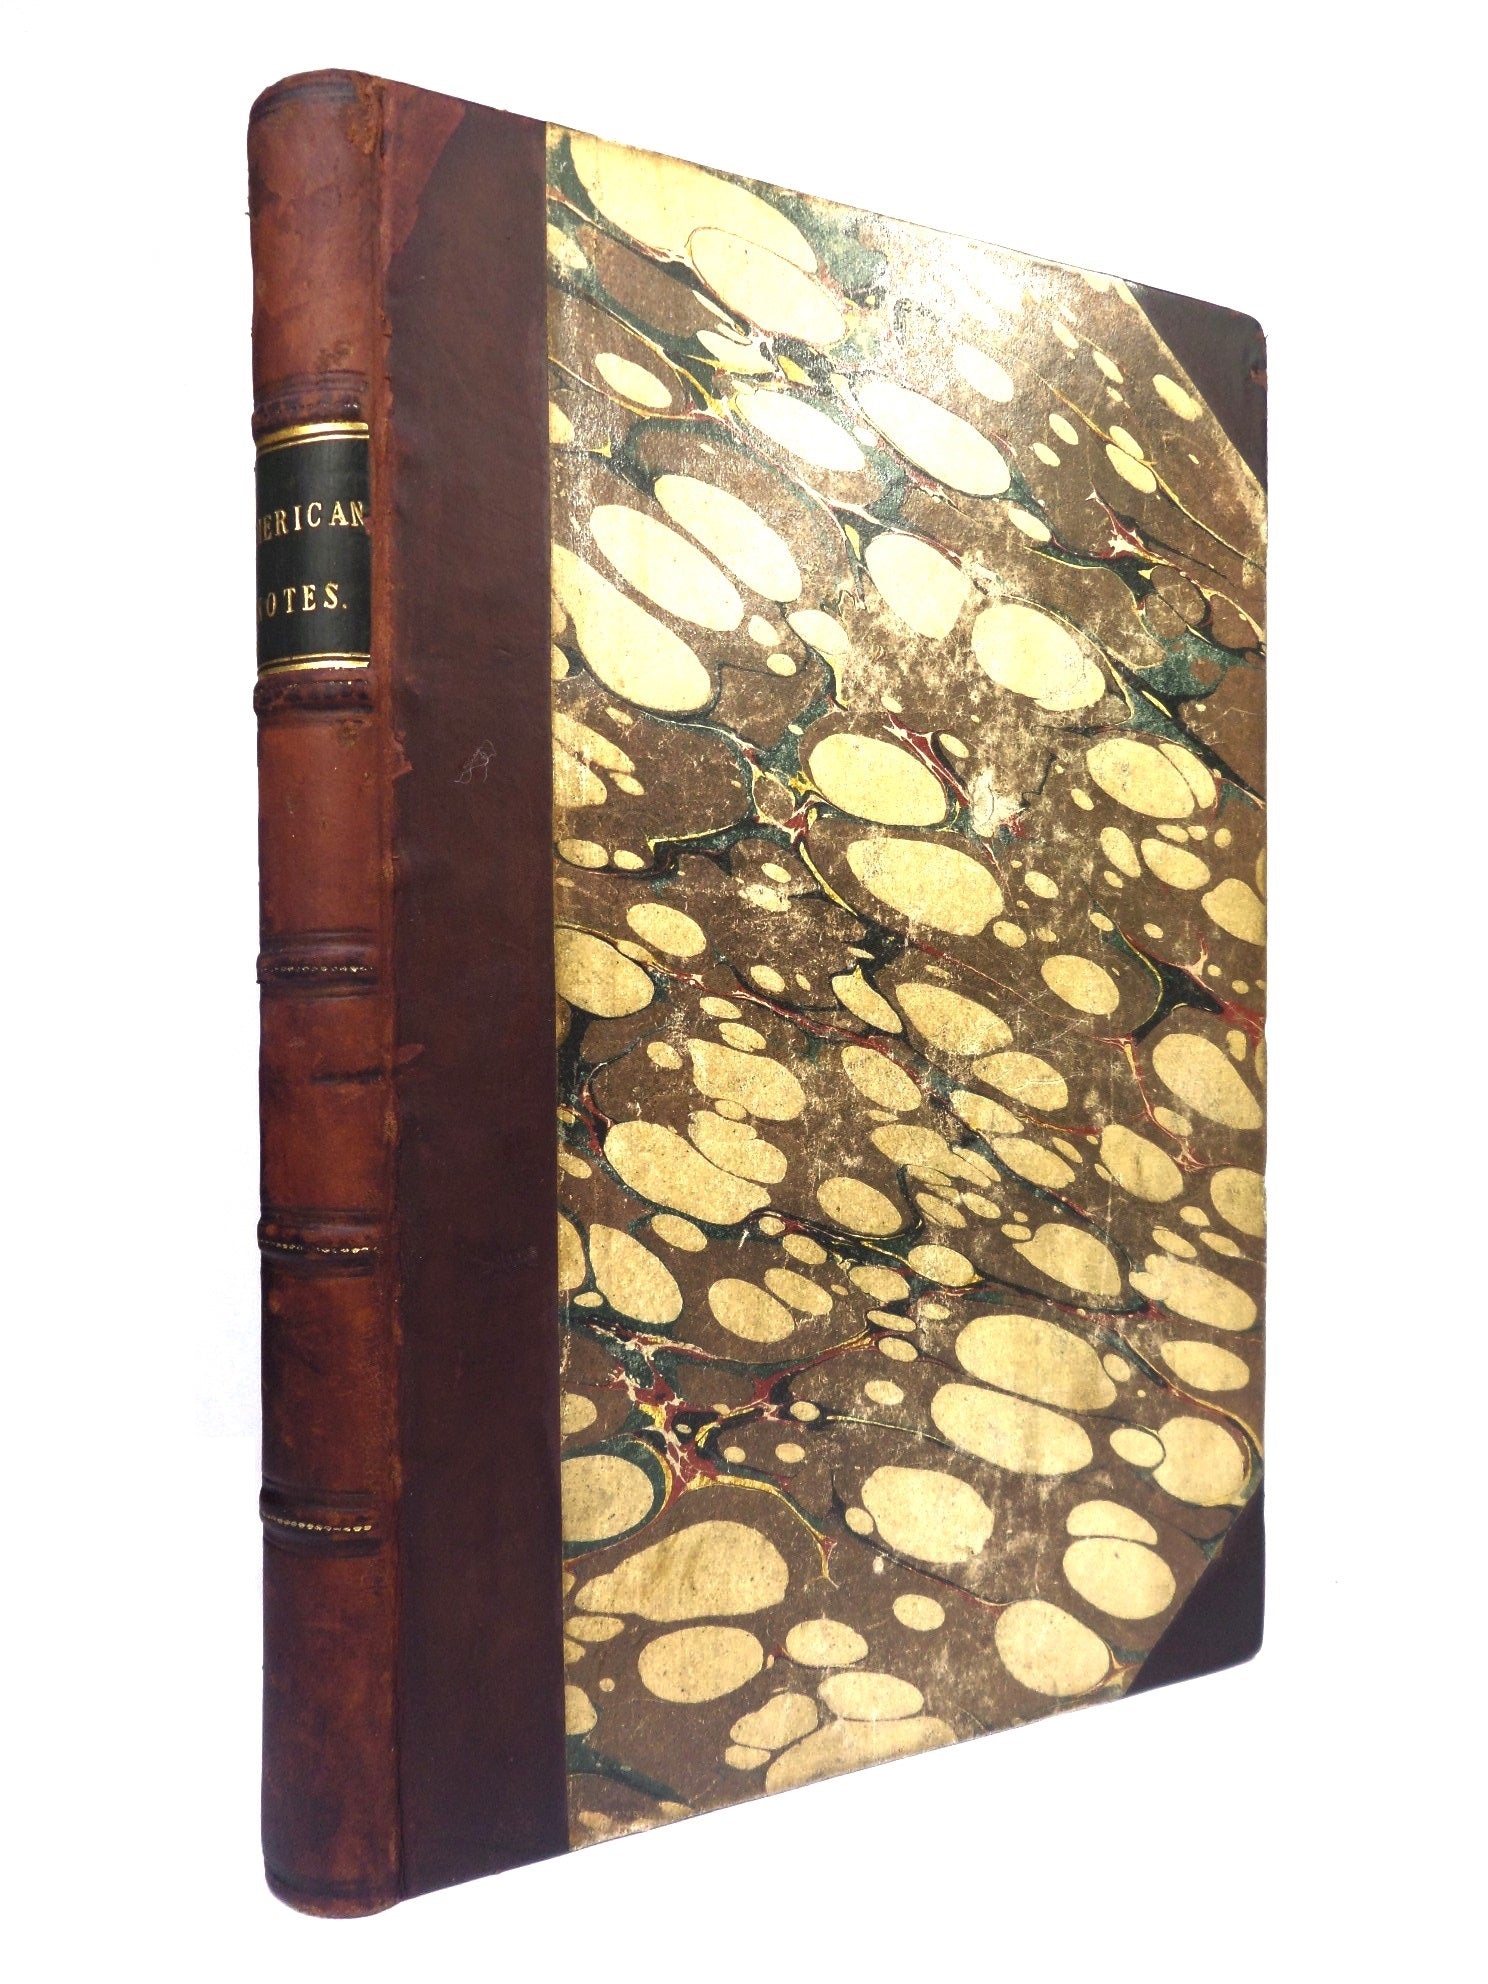 AMERICAN NOTES BY CHARLES DICKENS 1850 LEATHER BINDING